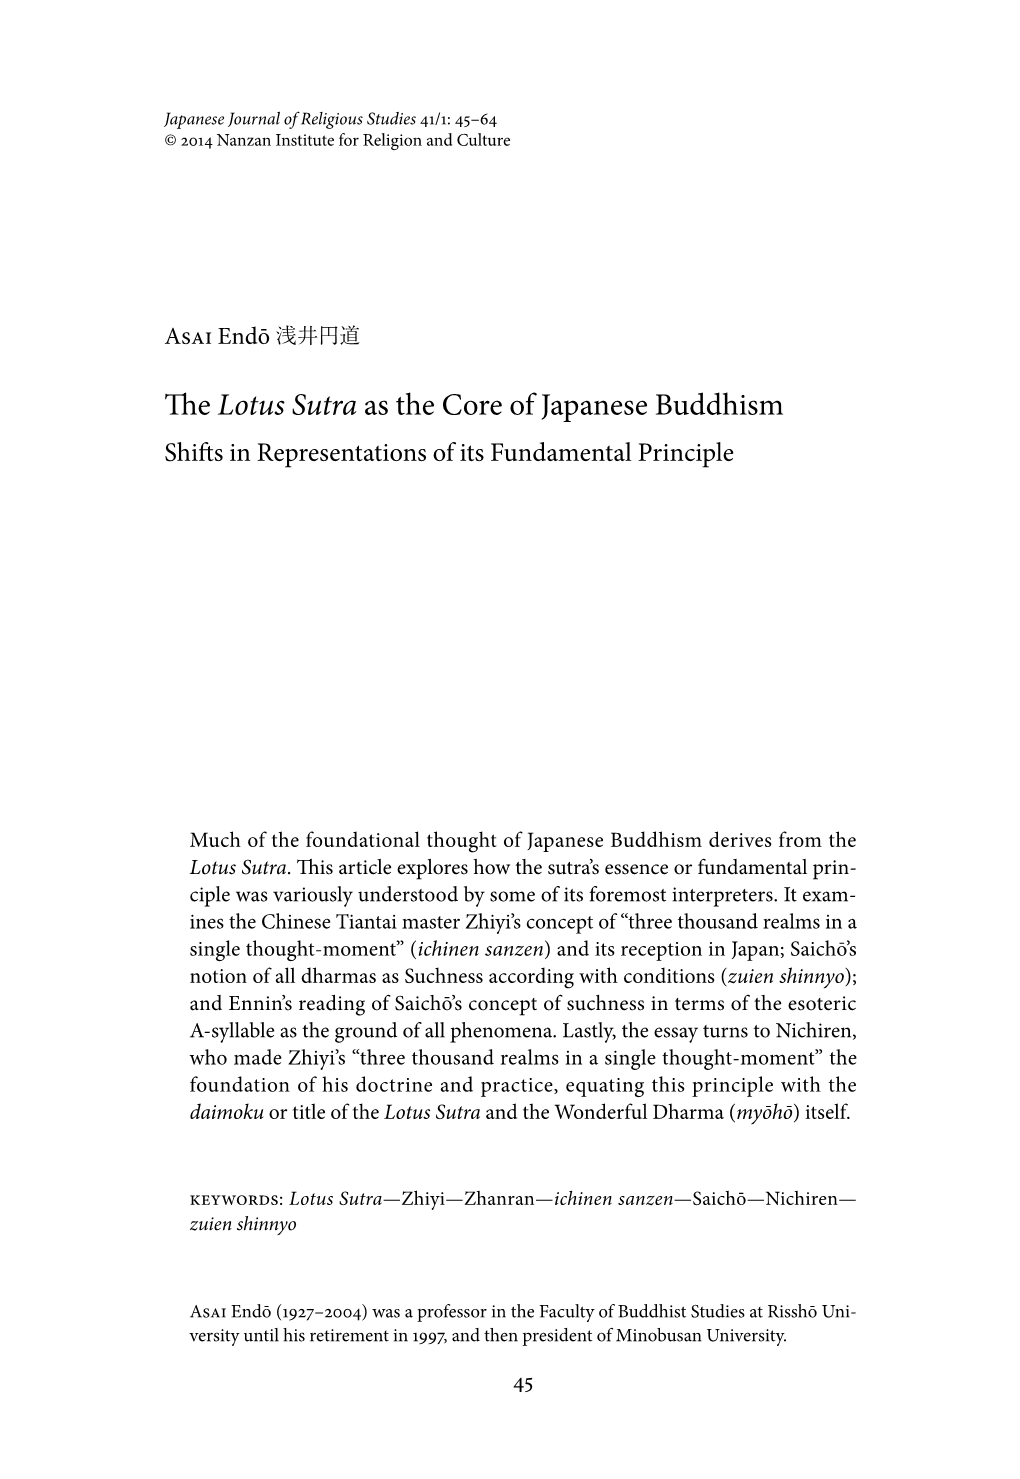 The Lotus Sutra As the Core of Japanese Buddhism Shifts in Representations of Its Fundamental Principle